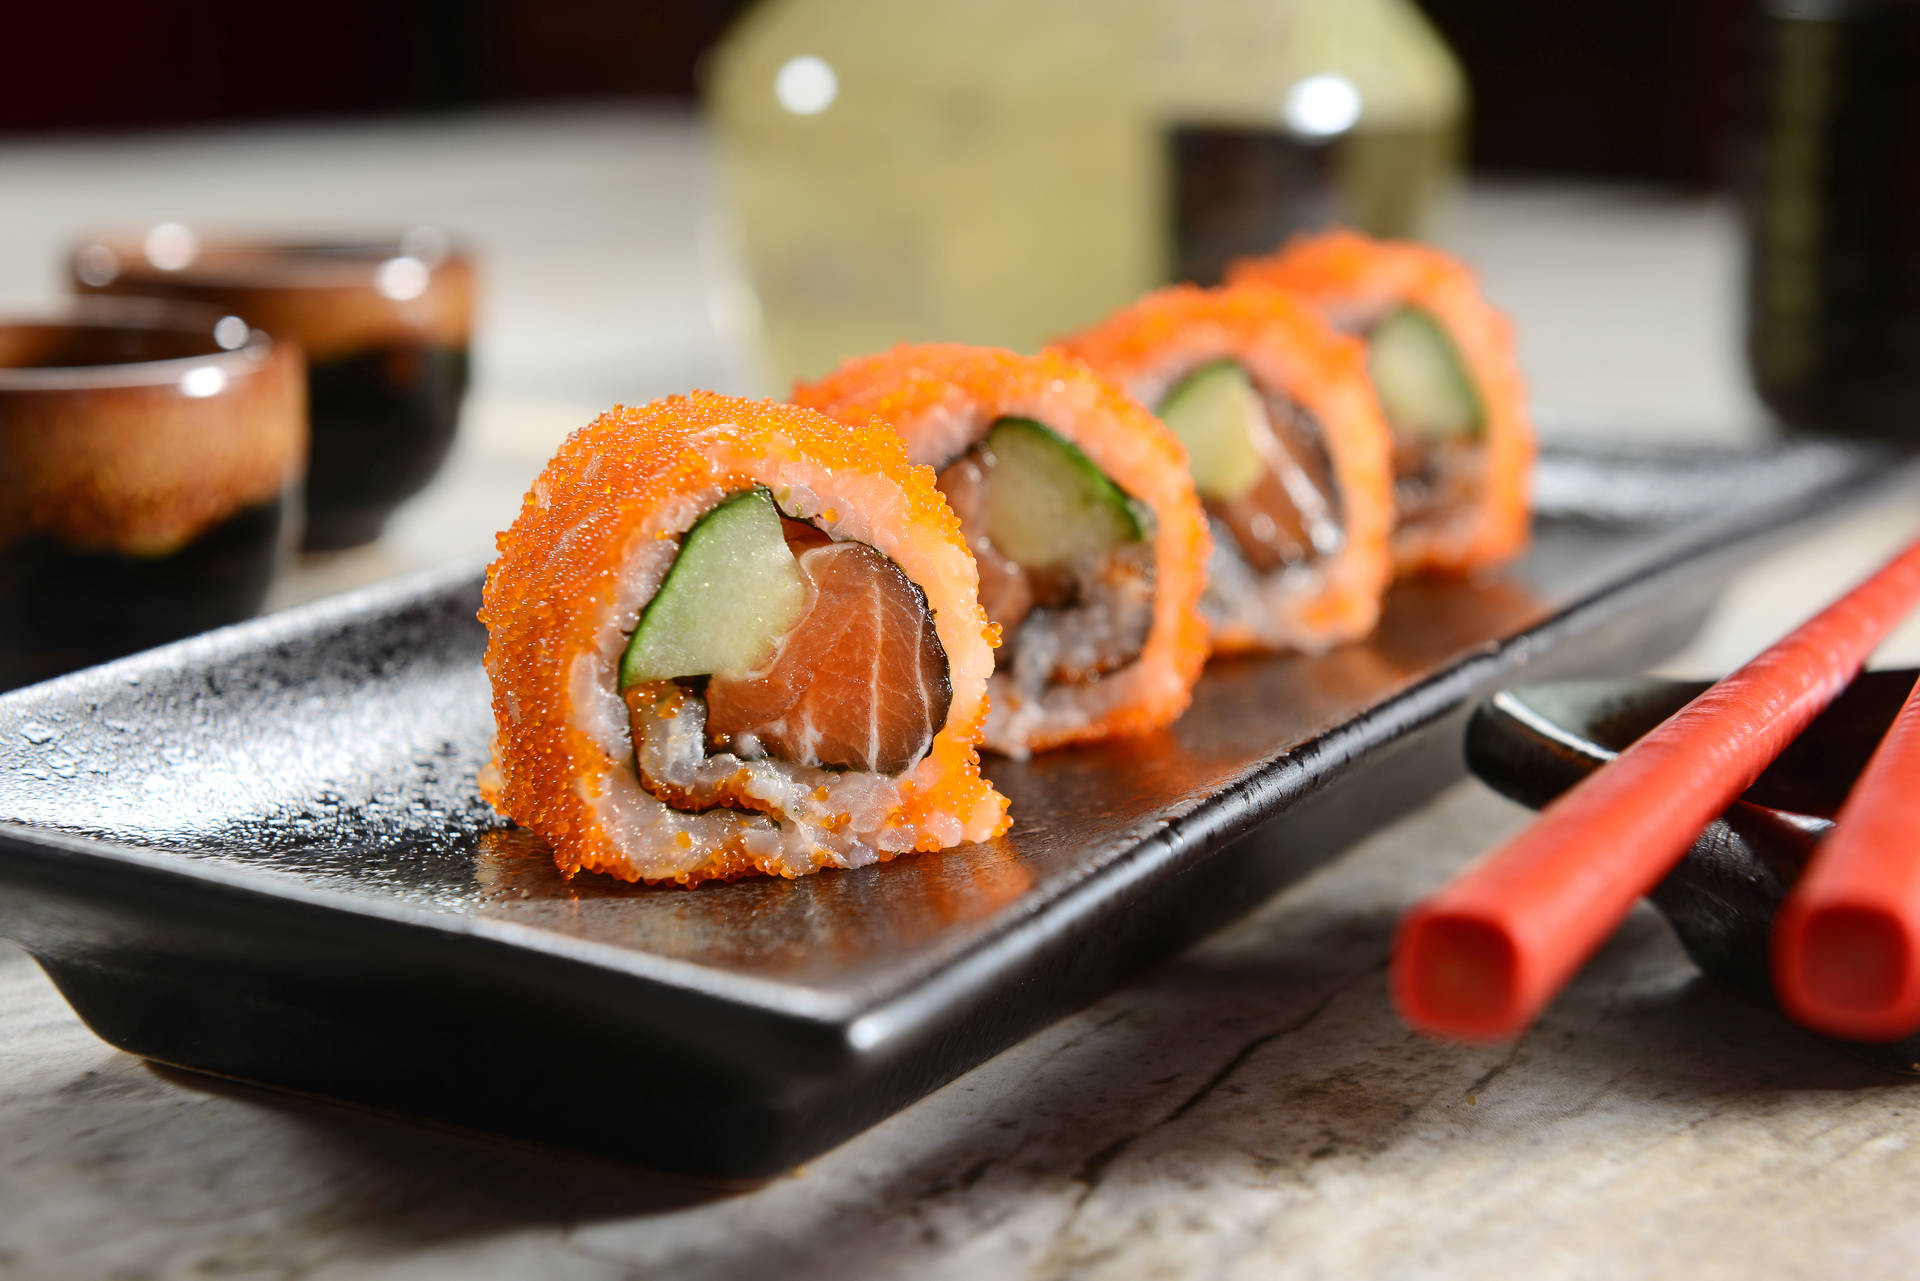 Sushi 7360X4912 Wallpaper and Background Image